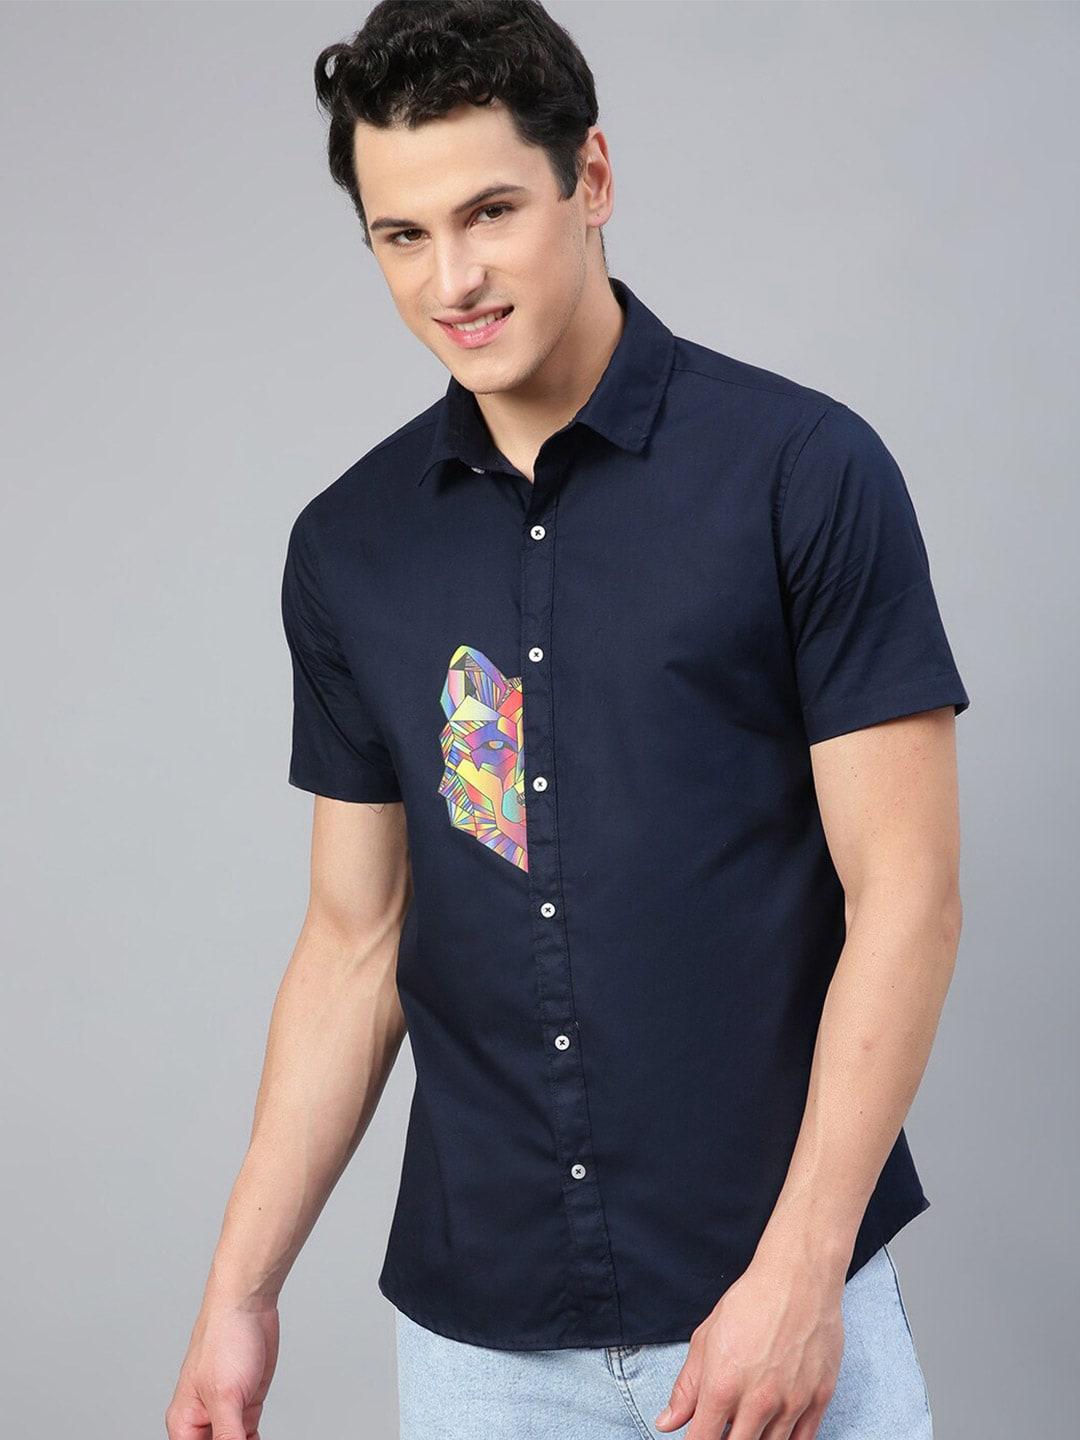 ftx-graphic-printed-spread-collar-pure-cotton-casual-shirt